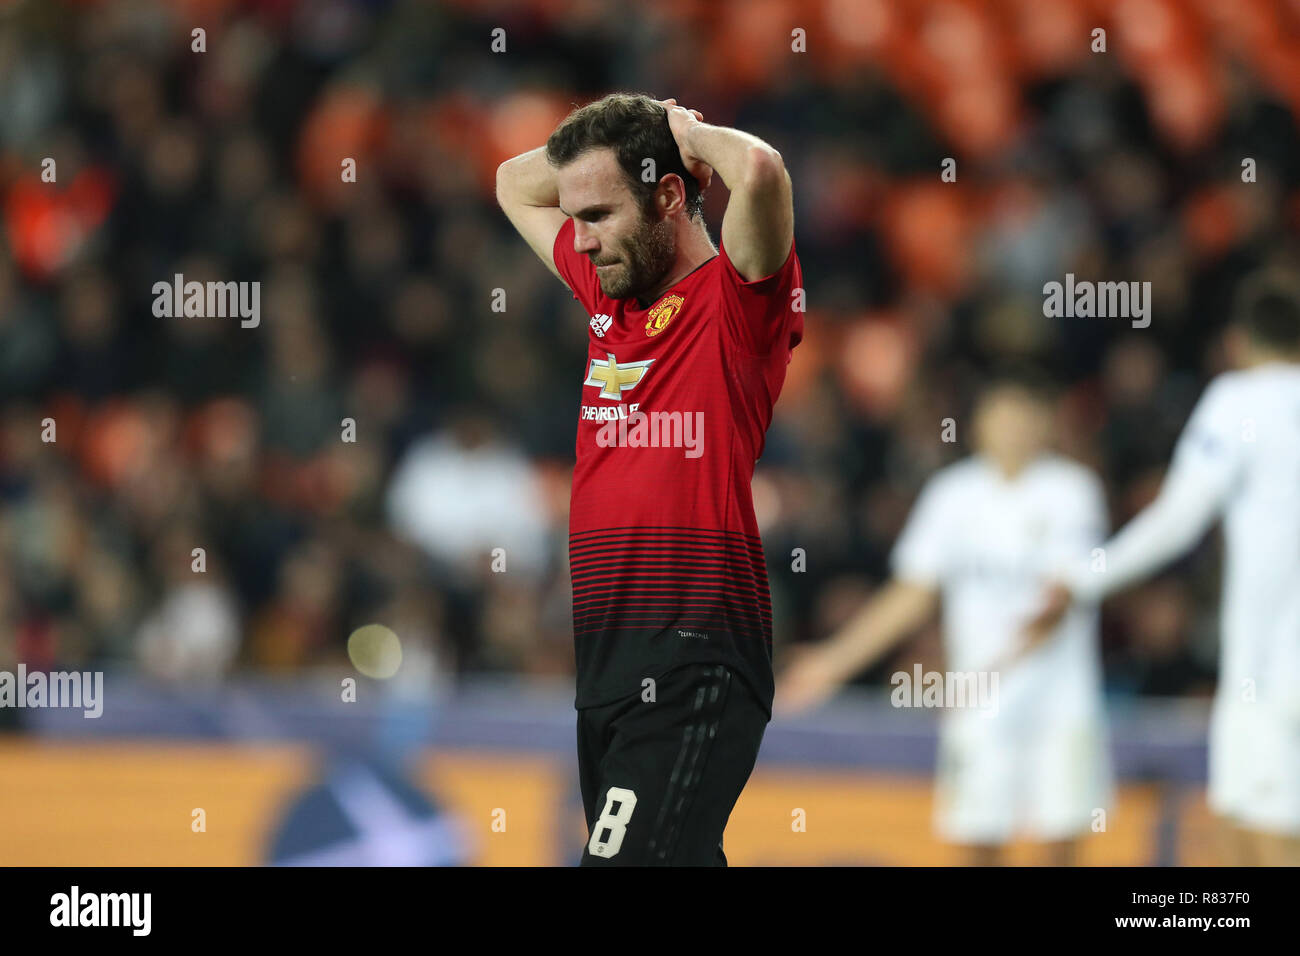 Valencia, Spain. 12th Dec, 2018. December 12, 2018 - Valencia, Spain - Juan Mata of Manchester United looks dejected after defeat during the UEFA Champions League, Group H football match between Valencia CF and Manchester United on December 12, 2018 at Mestalla stadium in Valencia, Spain Credit: Manuel Blondeau/ZUMA Wire/Alamy Live News Stock Photo